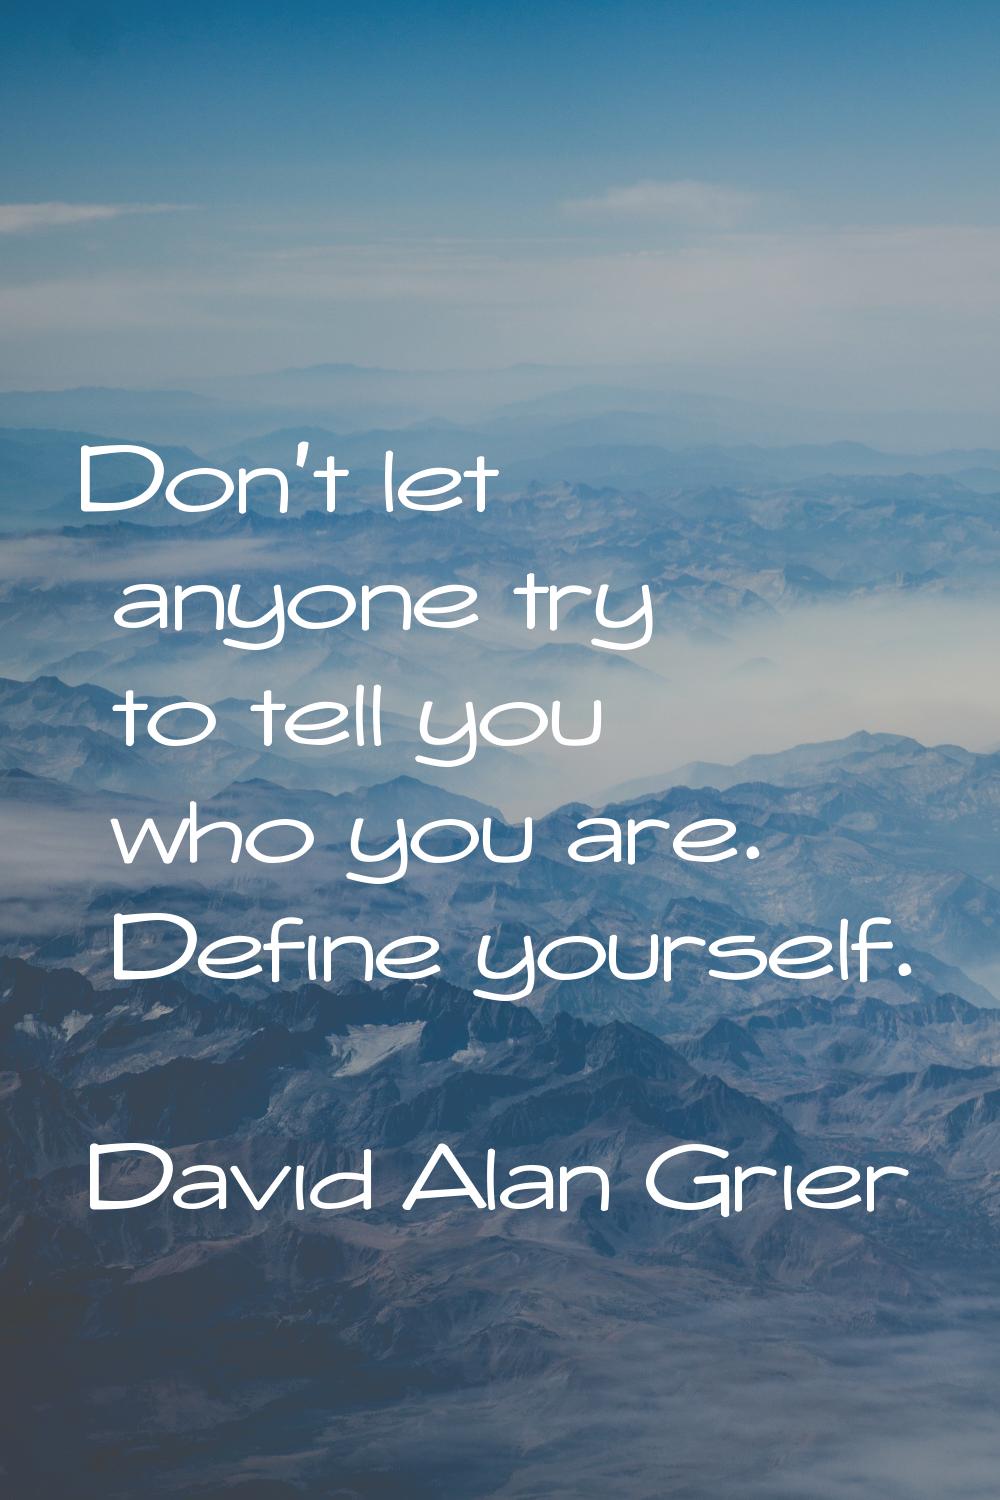 Don't let anyone try to tell you who you are. Define yourself.